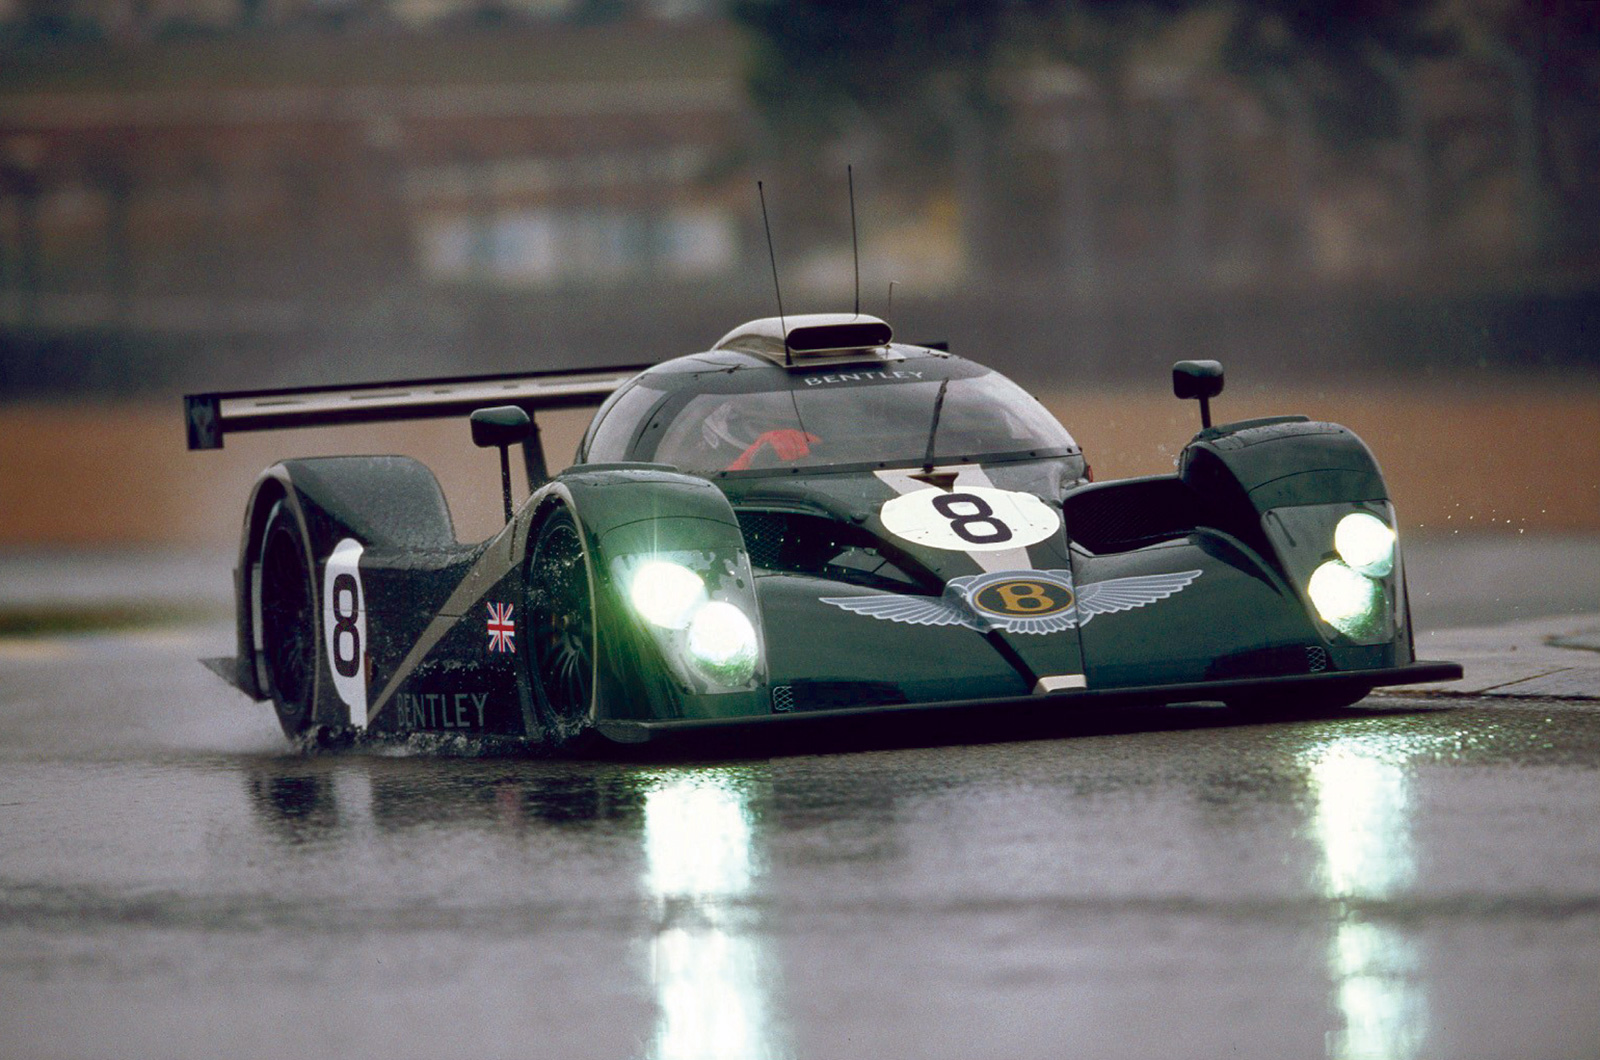 <p>With Bentley in the same stable as <strong>Audi</strong>, and with the latter enjoying success at Le Mans in 2000, there was an opportunity to evolve the <strong>Audi R8 </strong>endurance racer into a Bentley. The result was the Bentley EXP Speed 8 (the EXP bit was later dropped), which made its debut at La Sarthe in 2001. Bentley managed a class win in 2001 and again in 2002, before taking the overall win in 2003.</p>